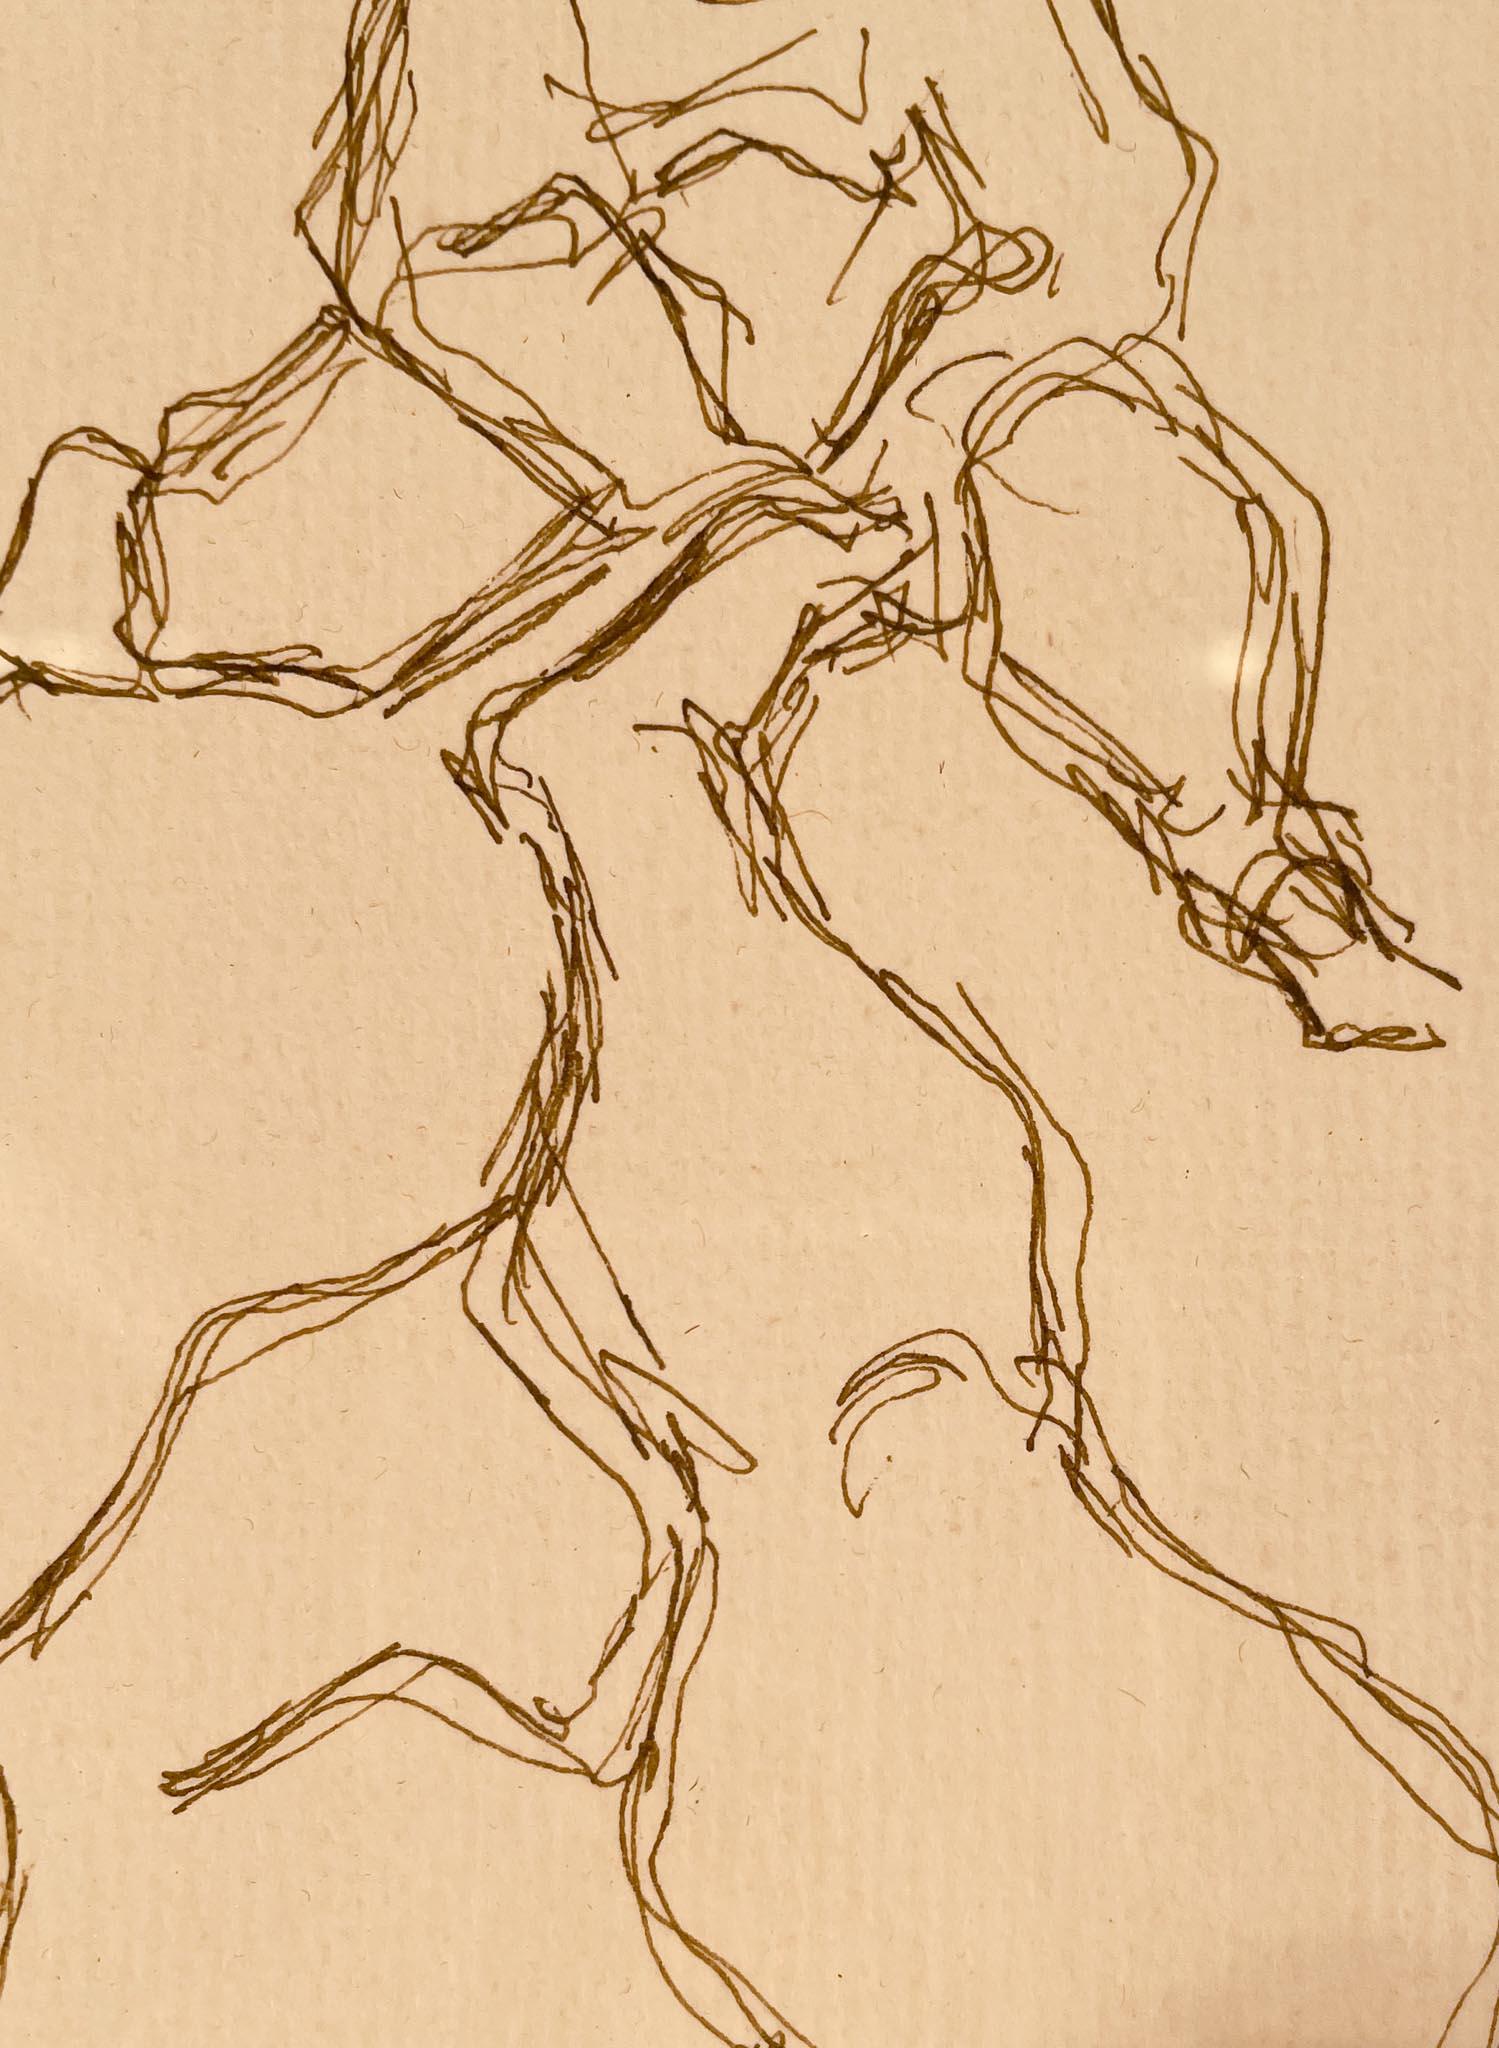 Study for Sculpture of Nude Woman Balancing Baby, 1949, by Chaim Gross (1902-1991)
Ink on paper
10 ½ x 7 ½ inches unframed (26.67 x 19.05 cm)
16 ½ x 13 ¾ inches framed (41.91 x 34.925 cm)
Signed and dated on bottom right

Description:
Chaim Gross